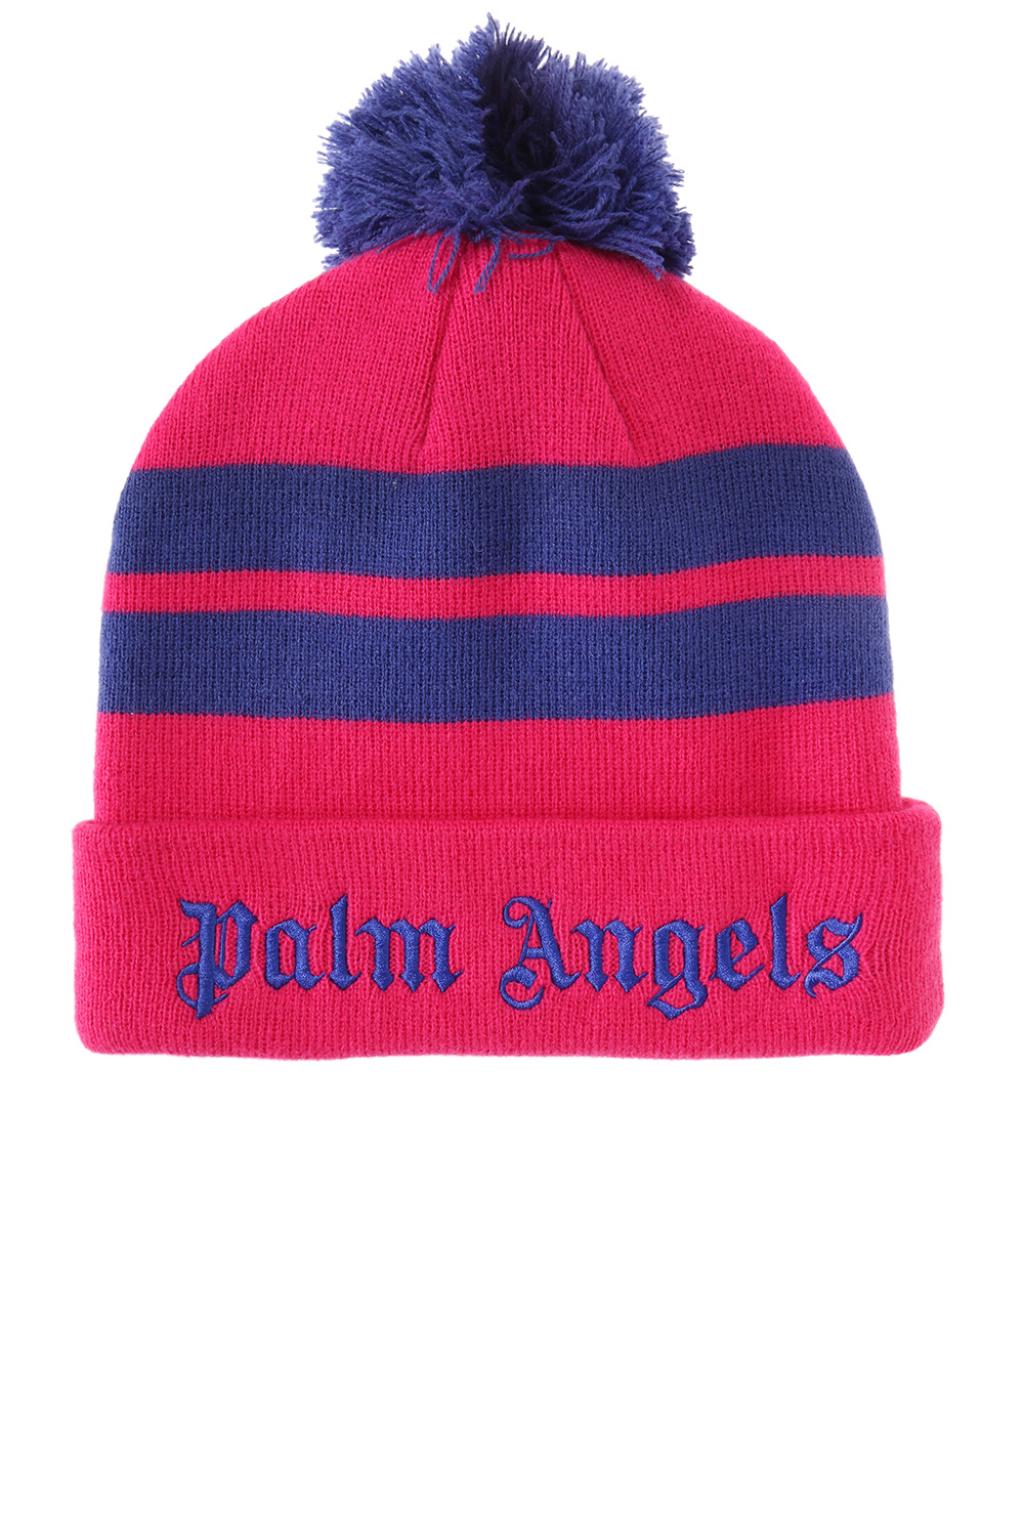 angels mitchell and ness